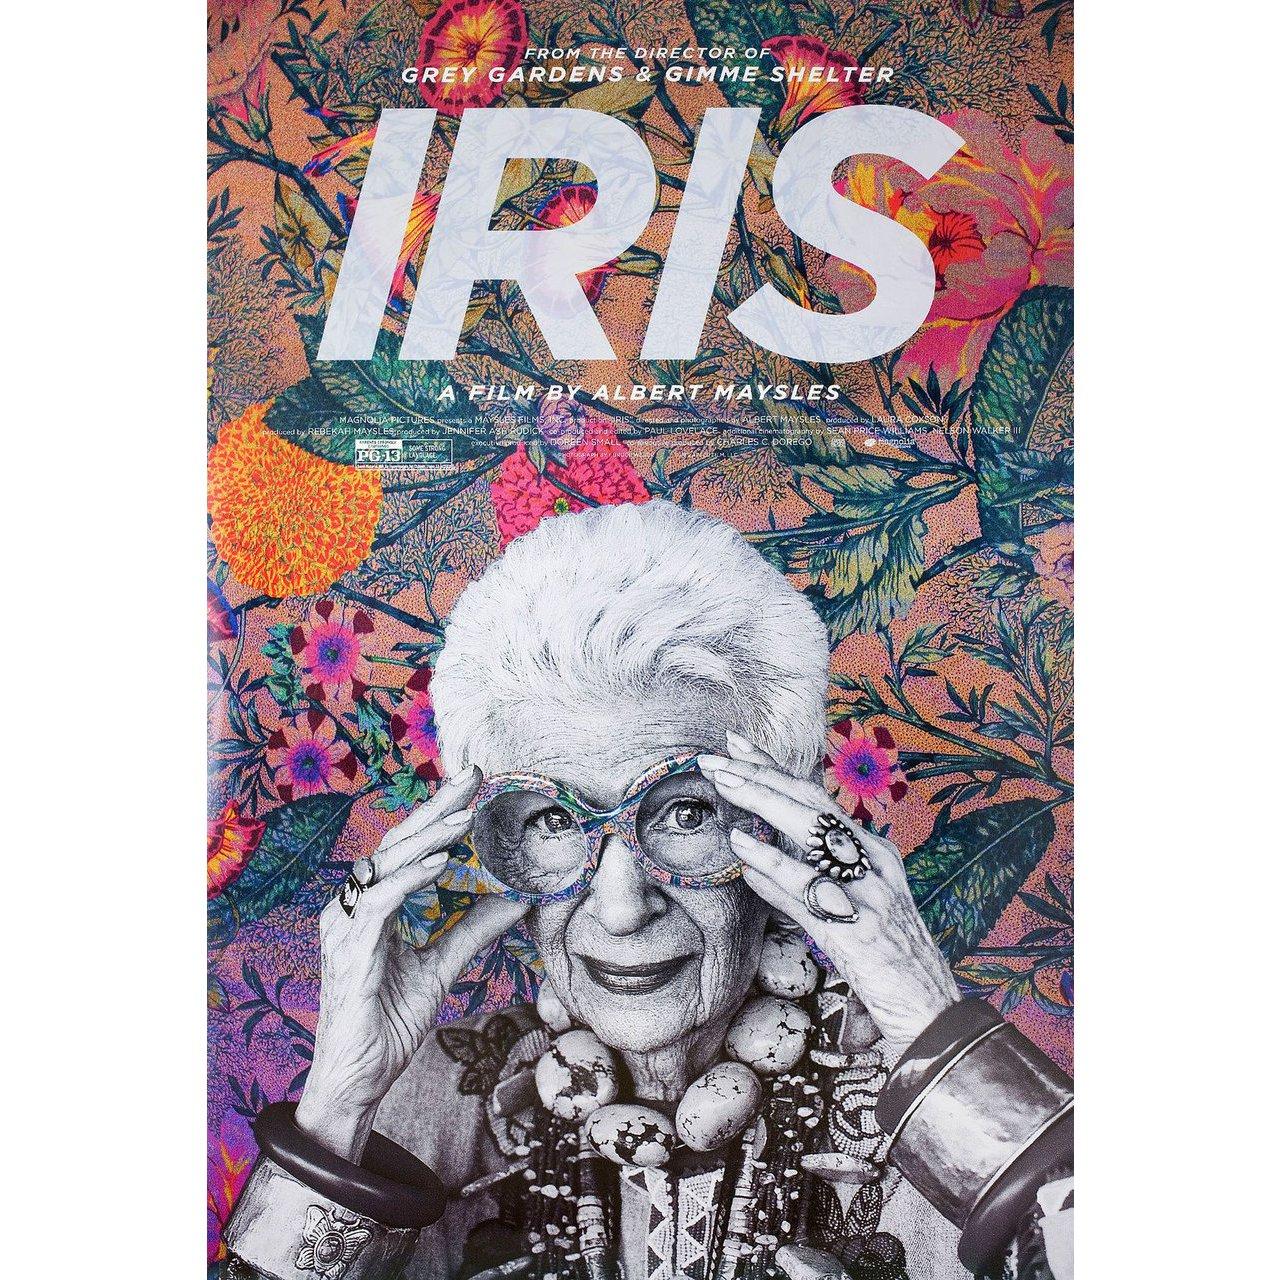 Original 2015 U.S. one sheet poster by Bruce Weber / Gravillis Inc. for the documentary film Iris directed by Albert Maysles with Iris Apfel. Very good-fine condition, rolled. Please note: the size is stated in inches and the actual size can vary by